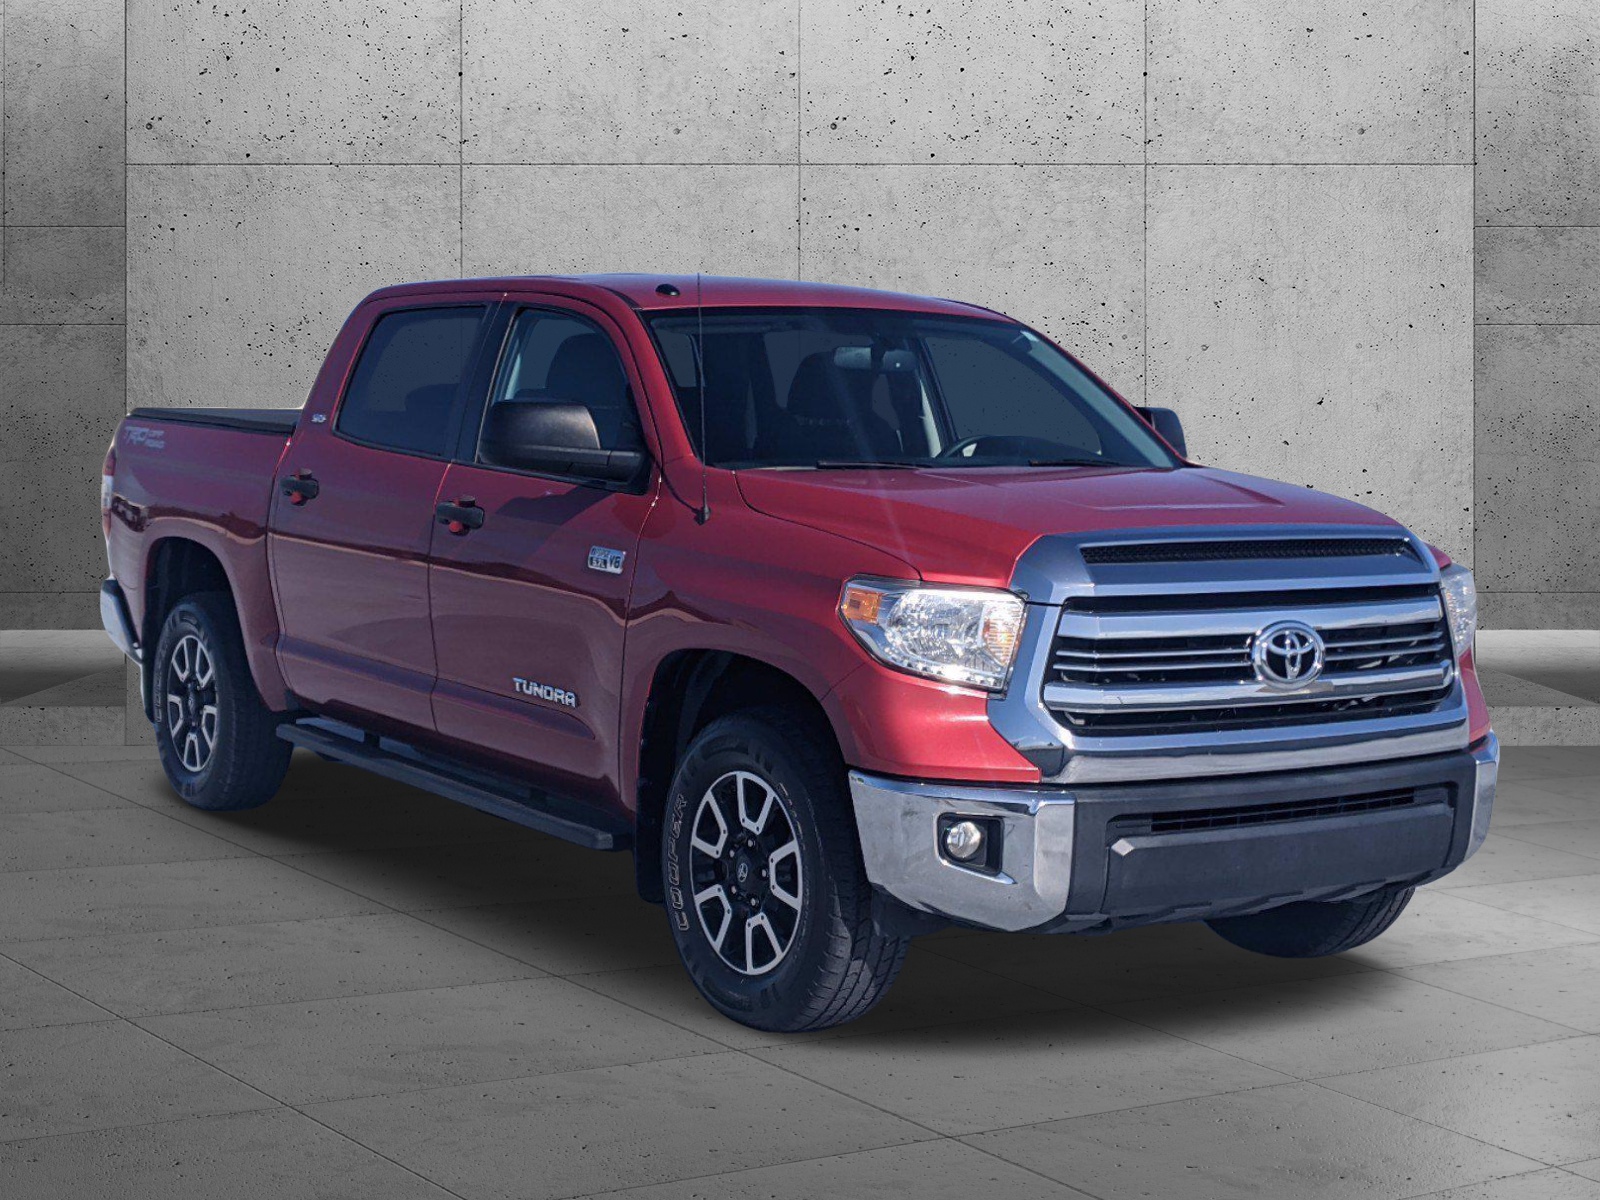 Pre-Owned 2016 Toyota Tundra 2WD Truck SR5 Crew Cab Pickup in Tampa #